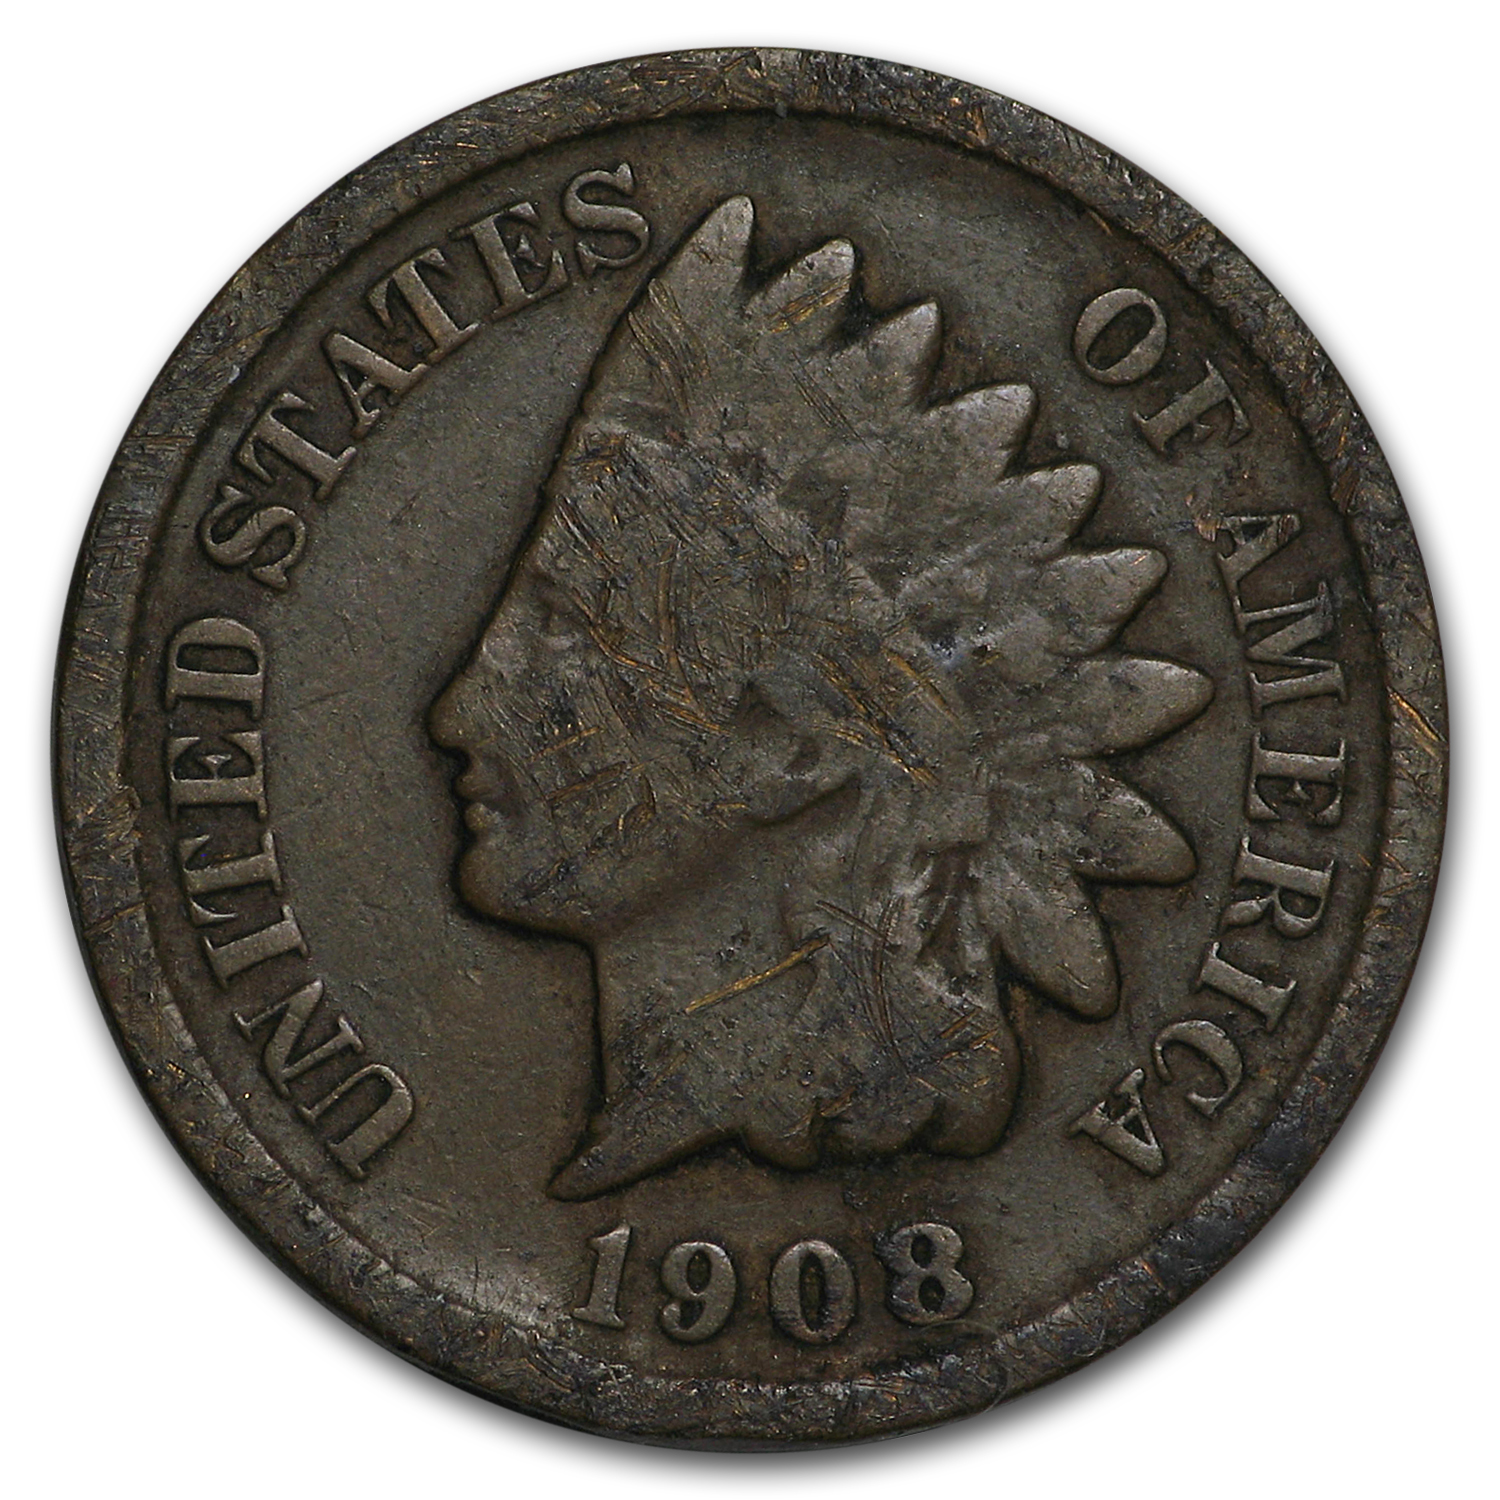 Buy 1908-S Indian Head Cent Good